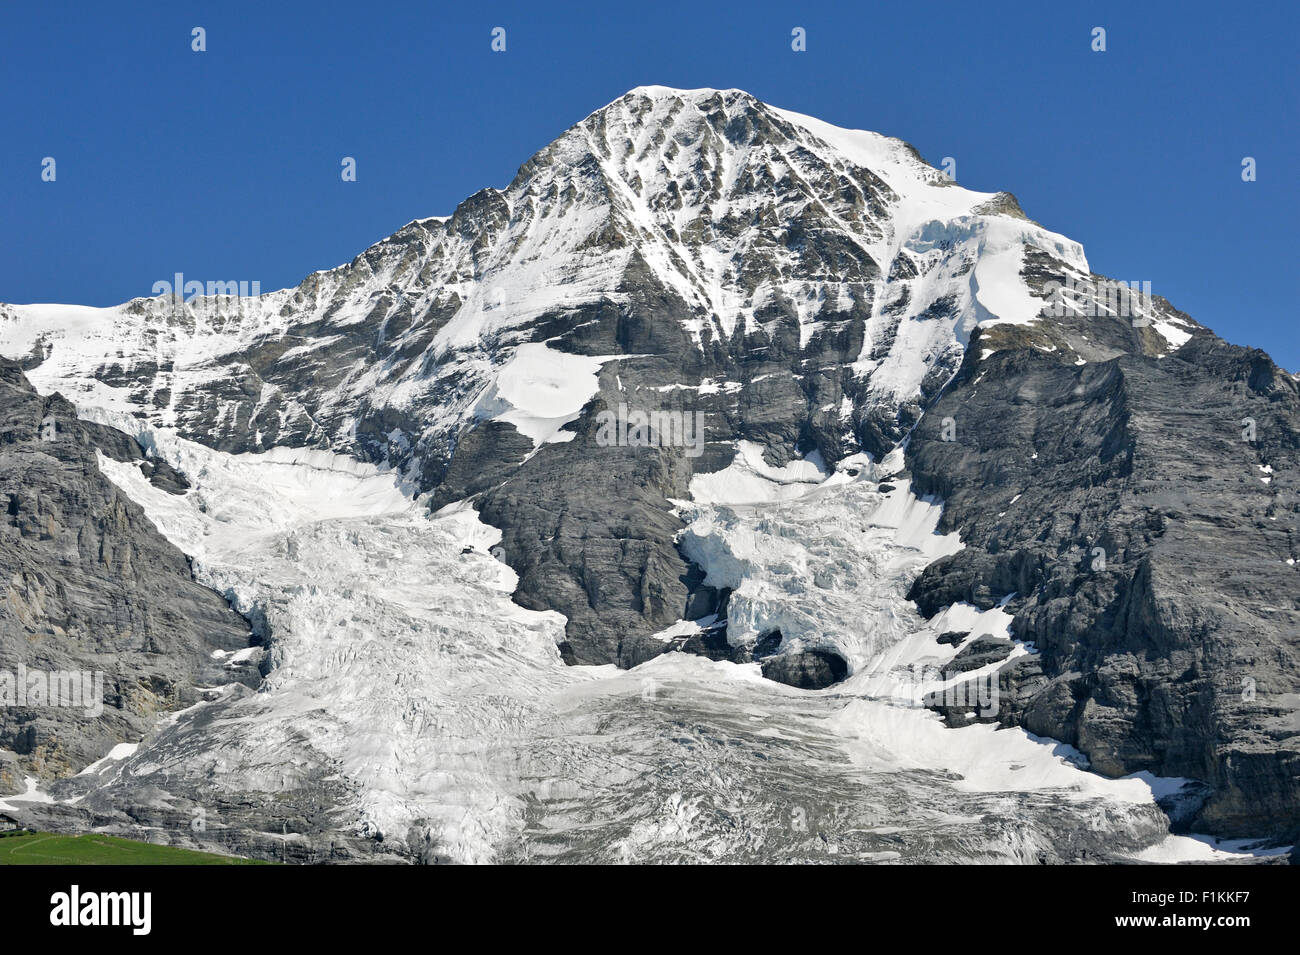 North face of the Mönch, forms part of a mountain ridge between the Jungfrau and the Eiger in the Bernese Alps, Switzerland Stock Photo